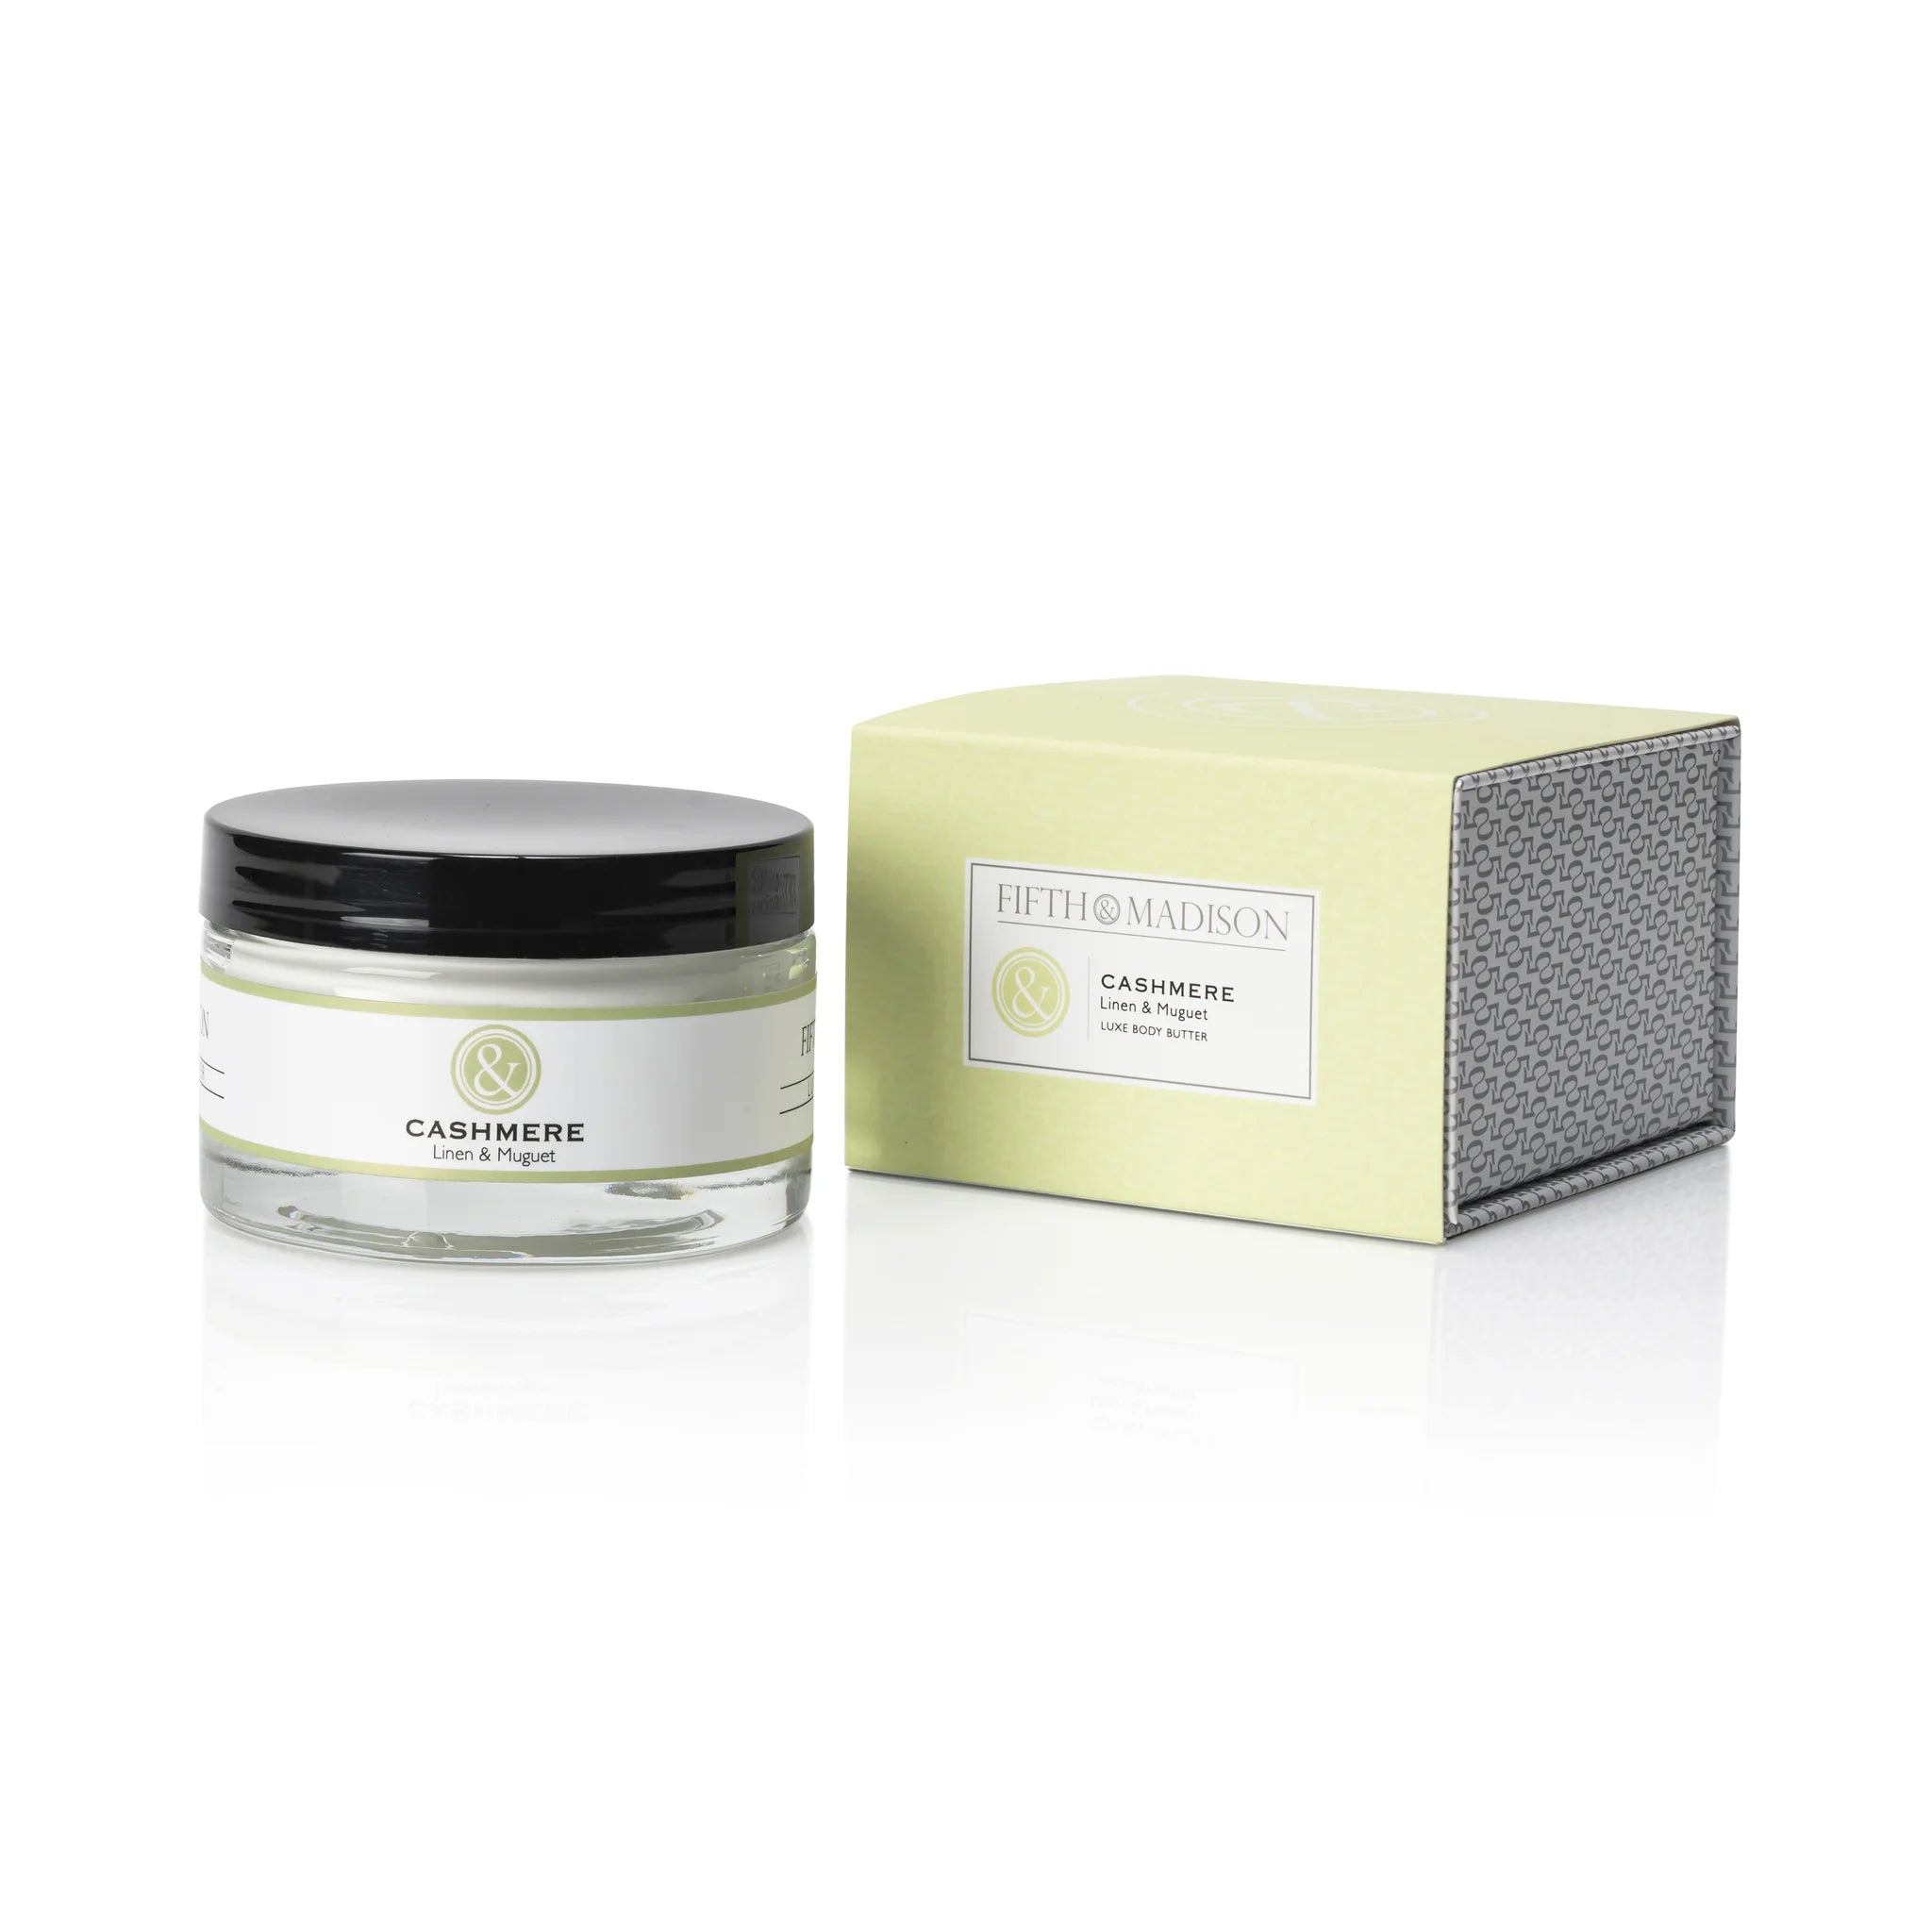 Cashmere 5th & Madison Luxe Body Butter